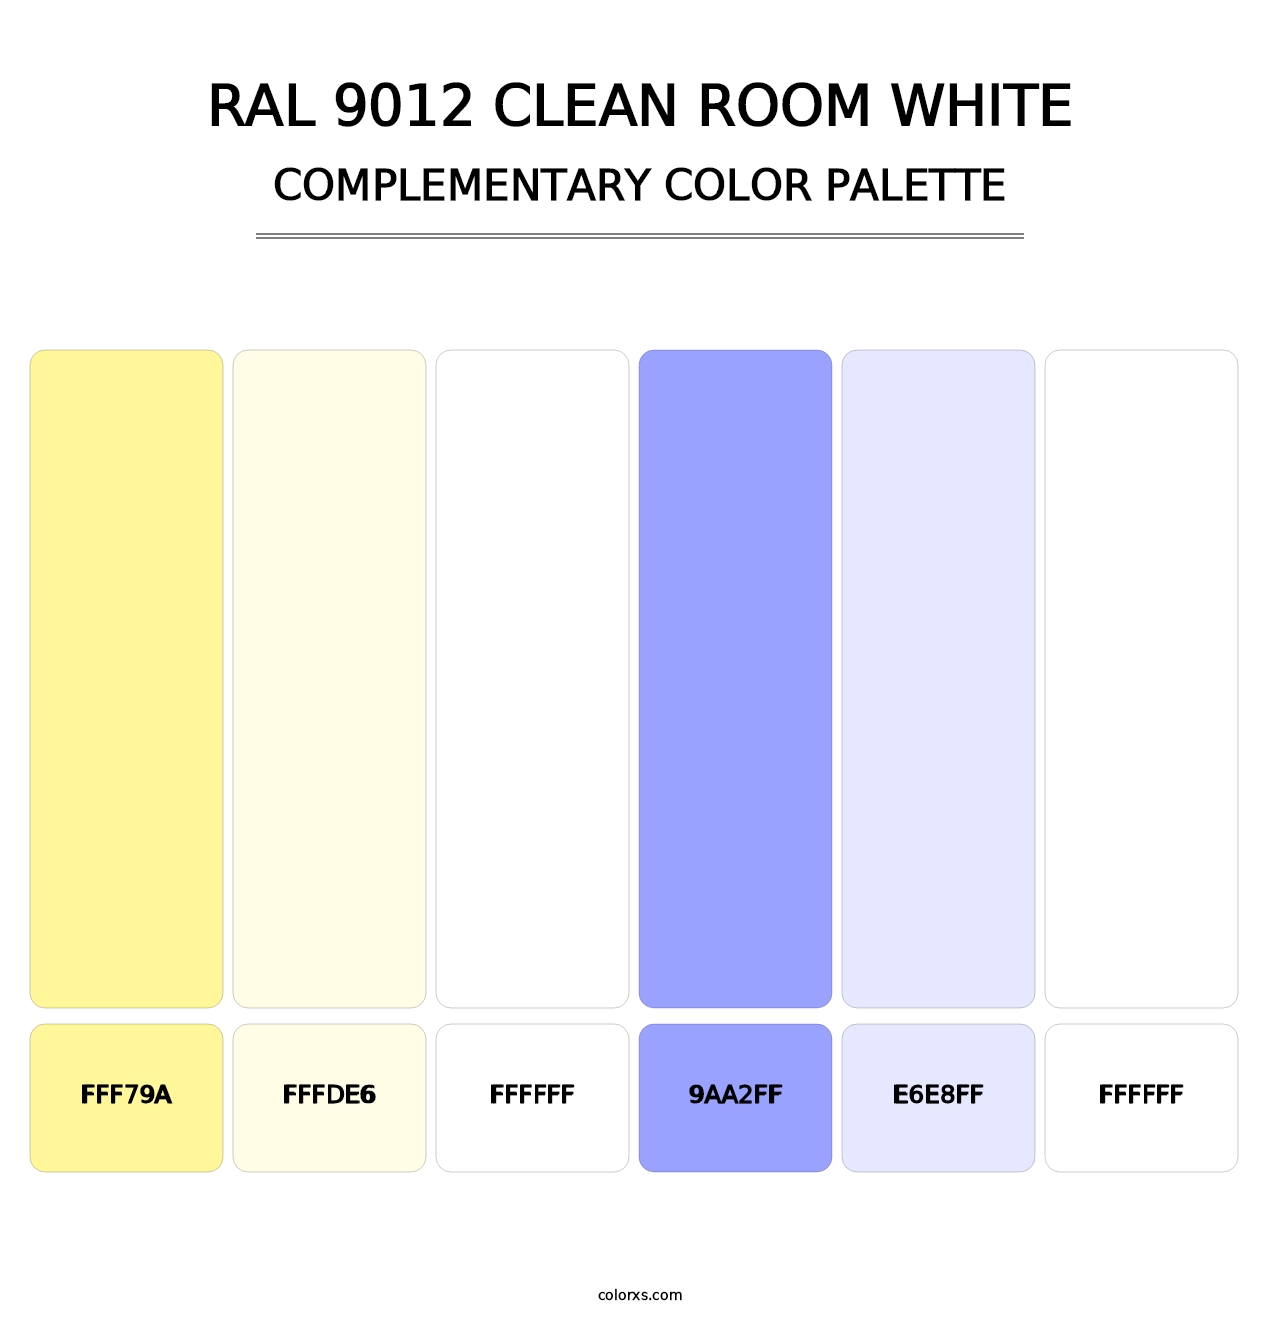 RAL 9012 Clean Room White - Complementary Color Palette